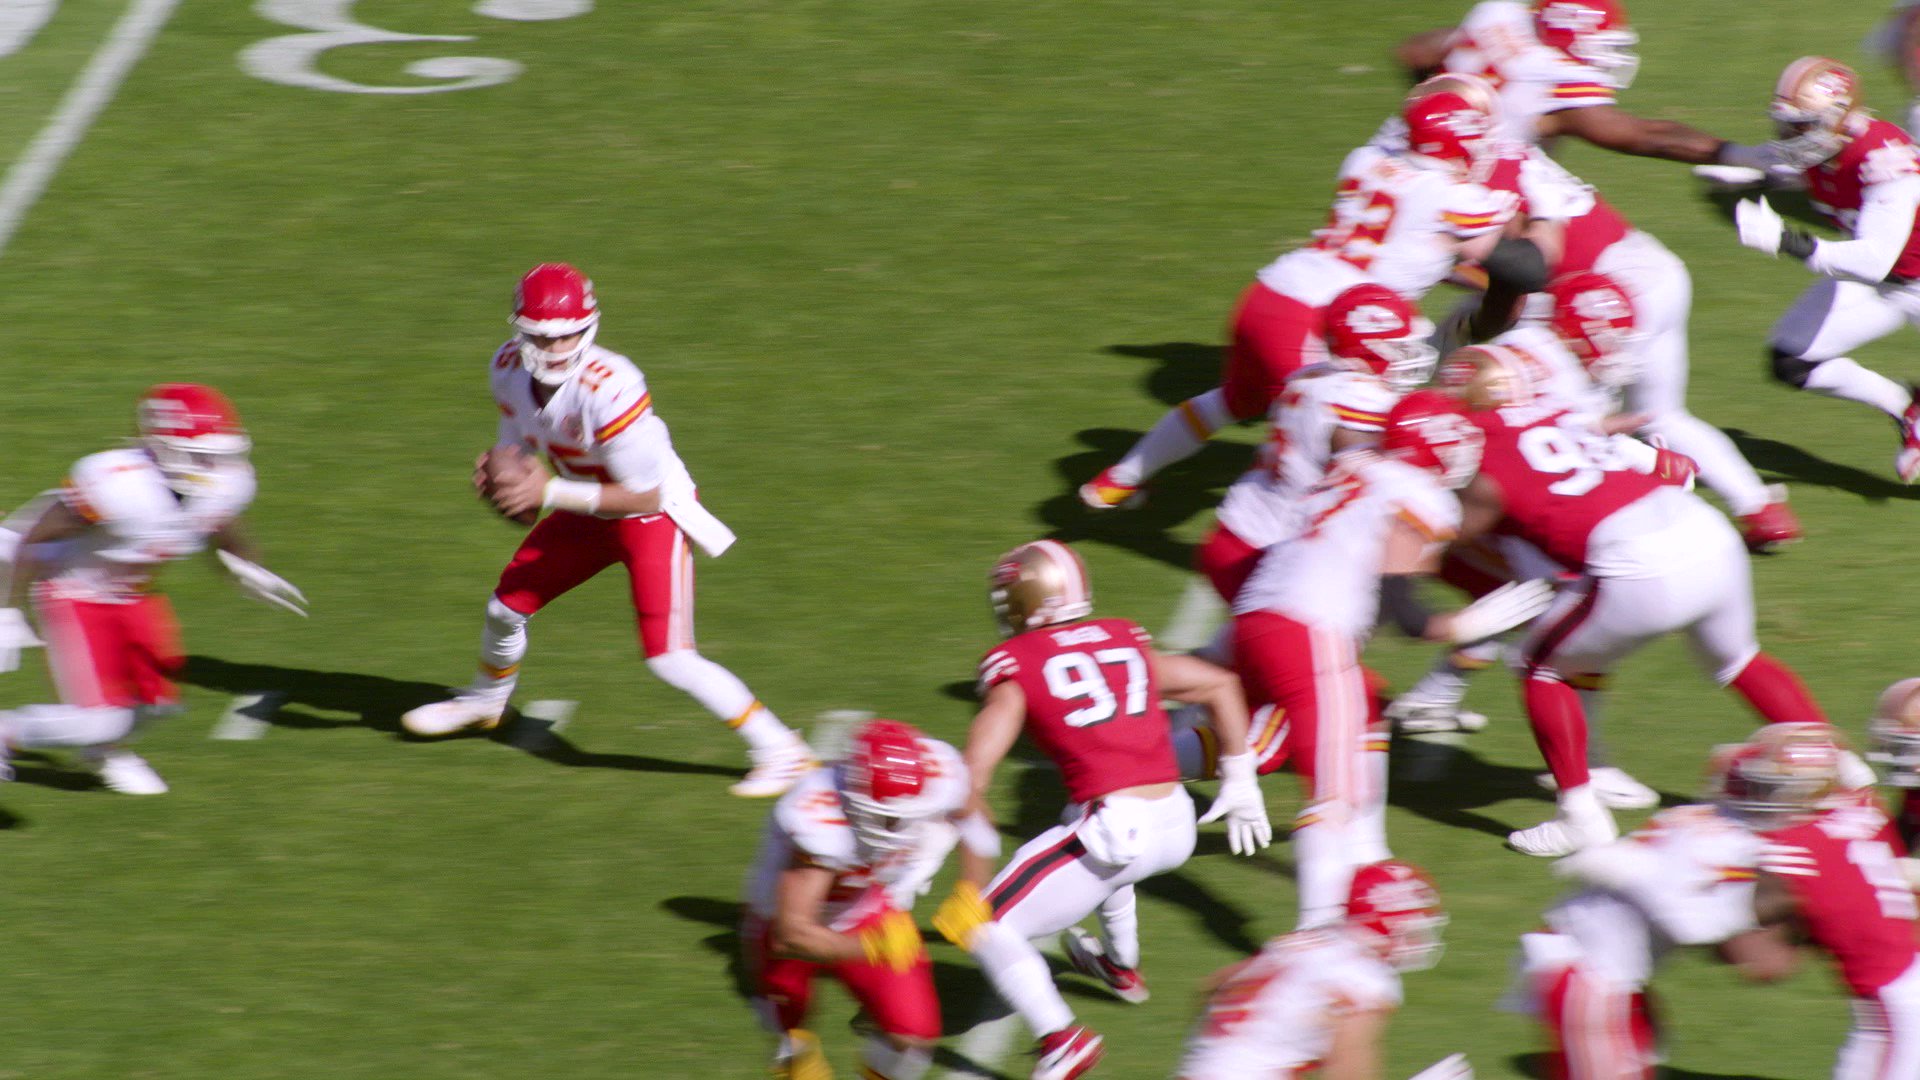 Kansas City Chiefs on X: Despite not playing last week, no player has more  touchdown catches this season than @tkelce 